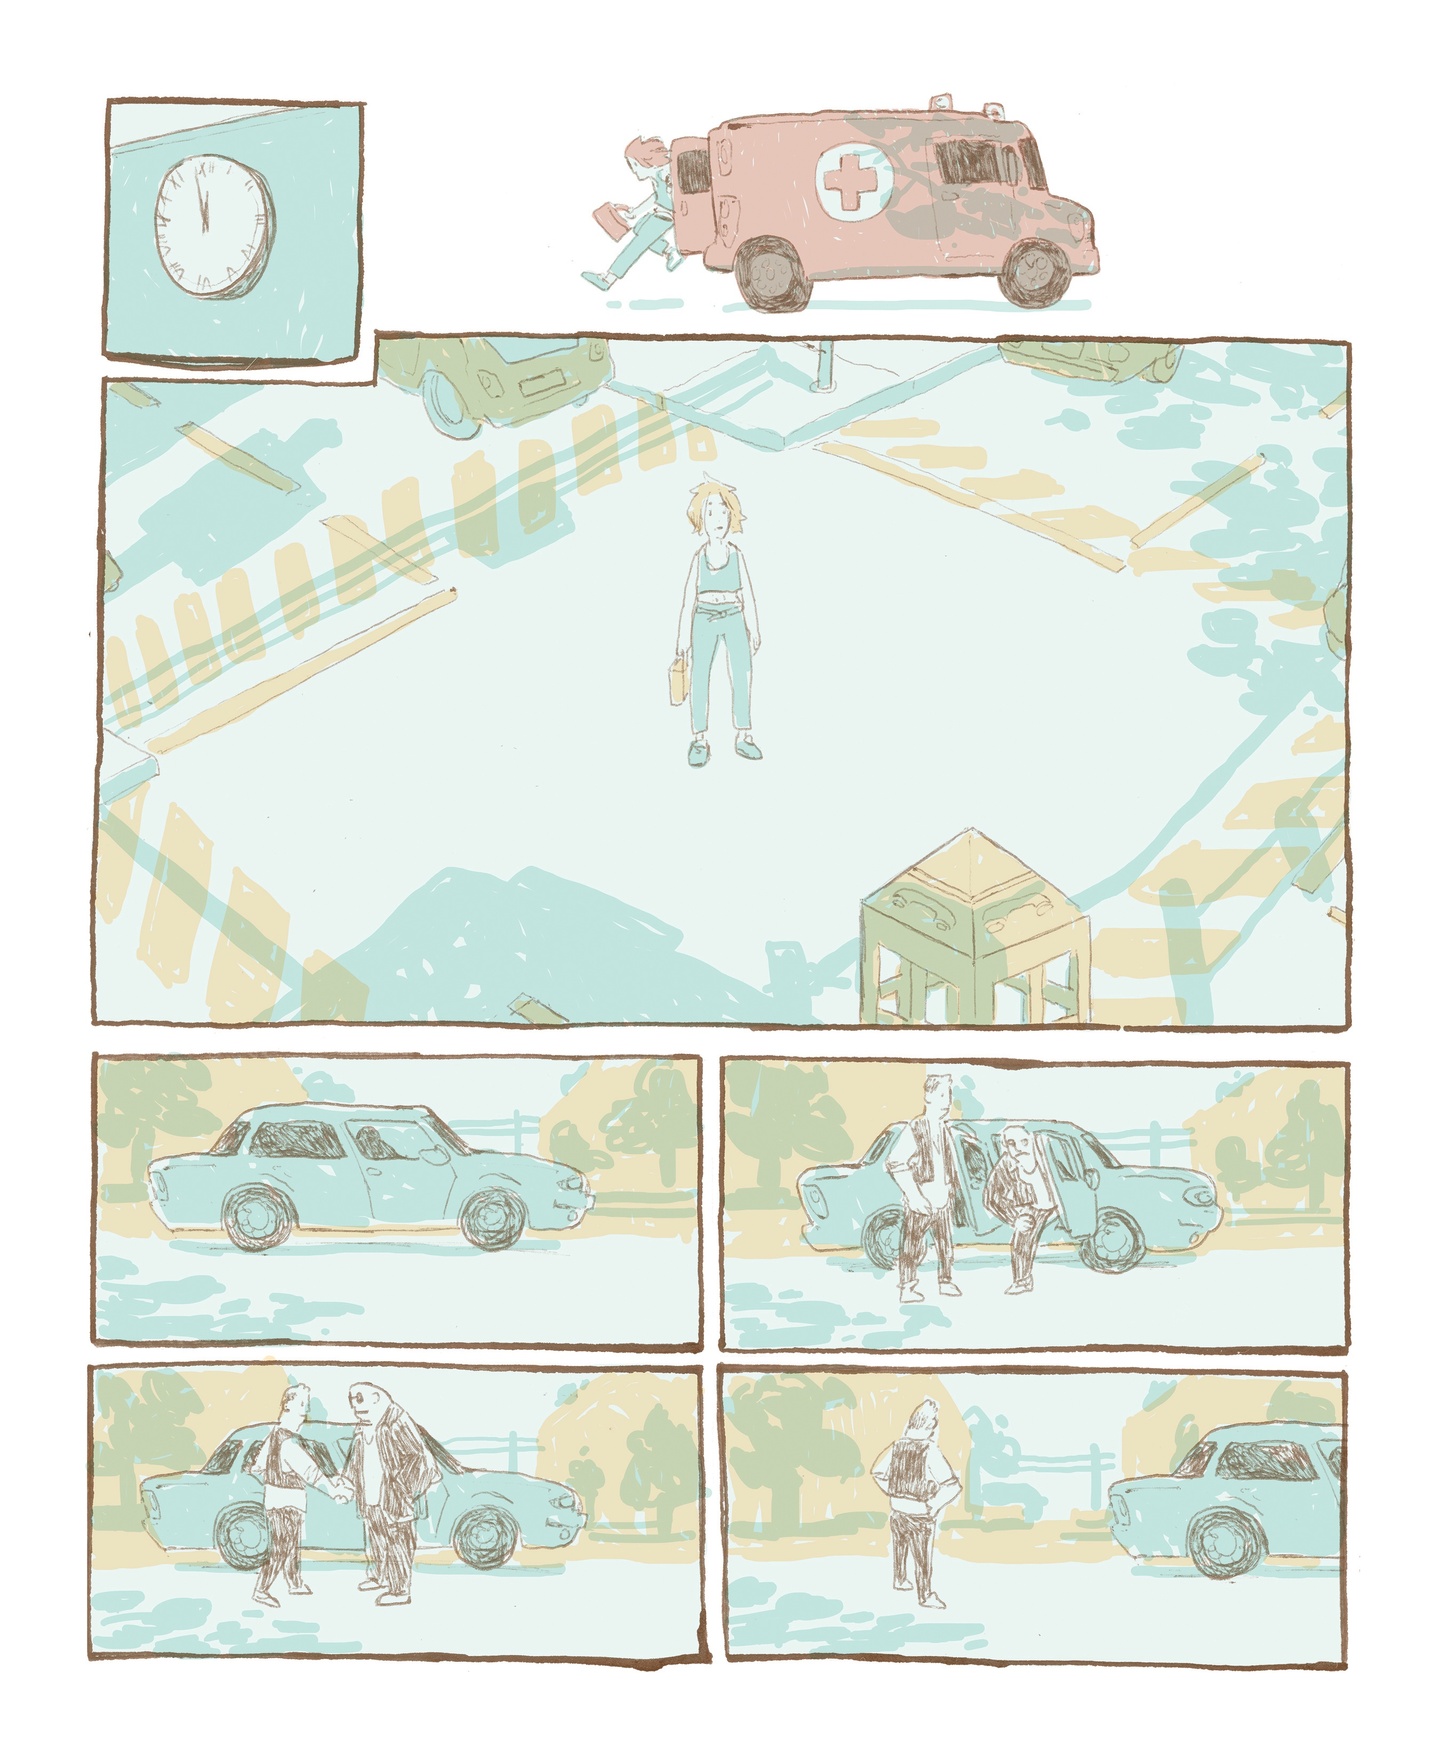 Comic page - the person in the tank top hops out of the ambulance in a parking lot. The person in the vest gets out of a car nearby.